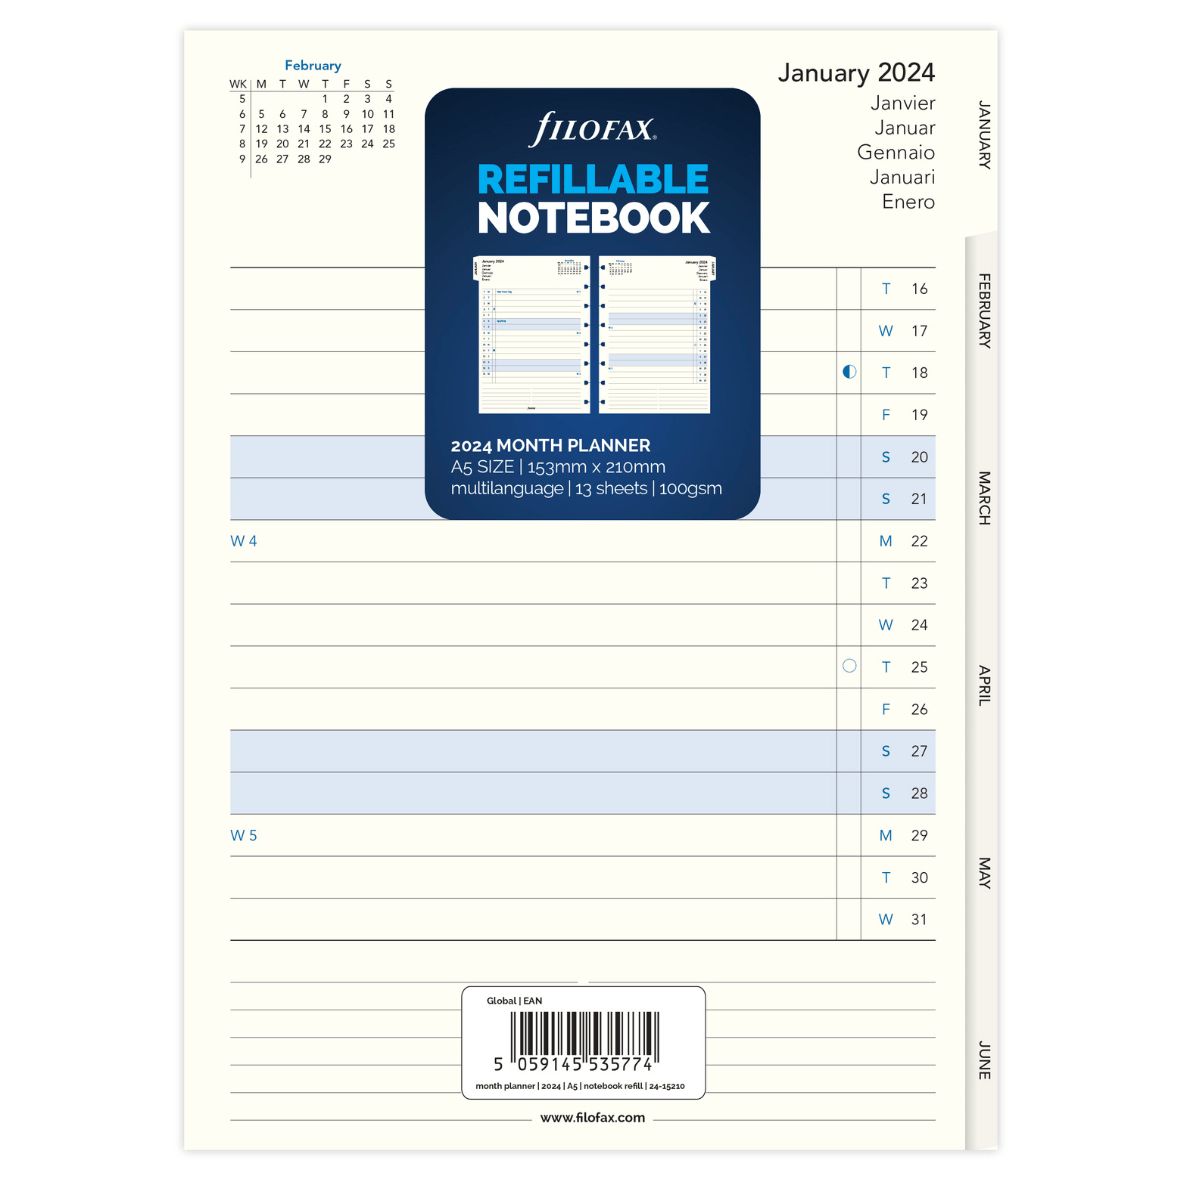 24-15210 - NOTEB REFILL A5 MONTH PLANNER 2024